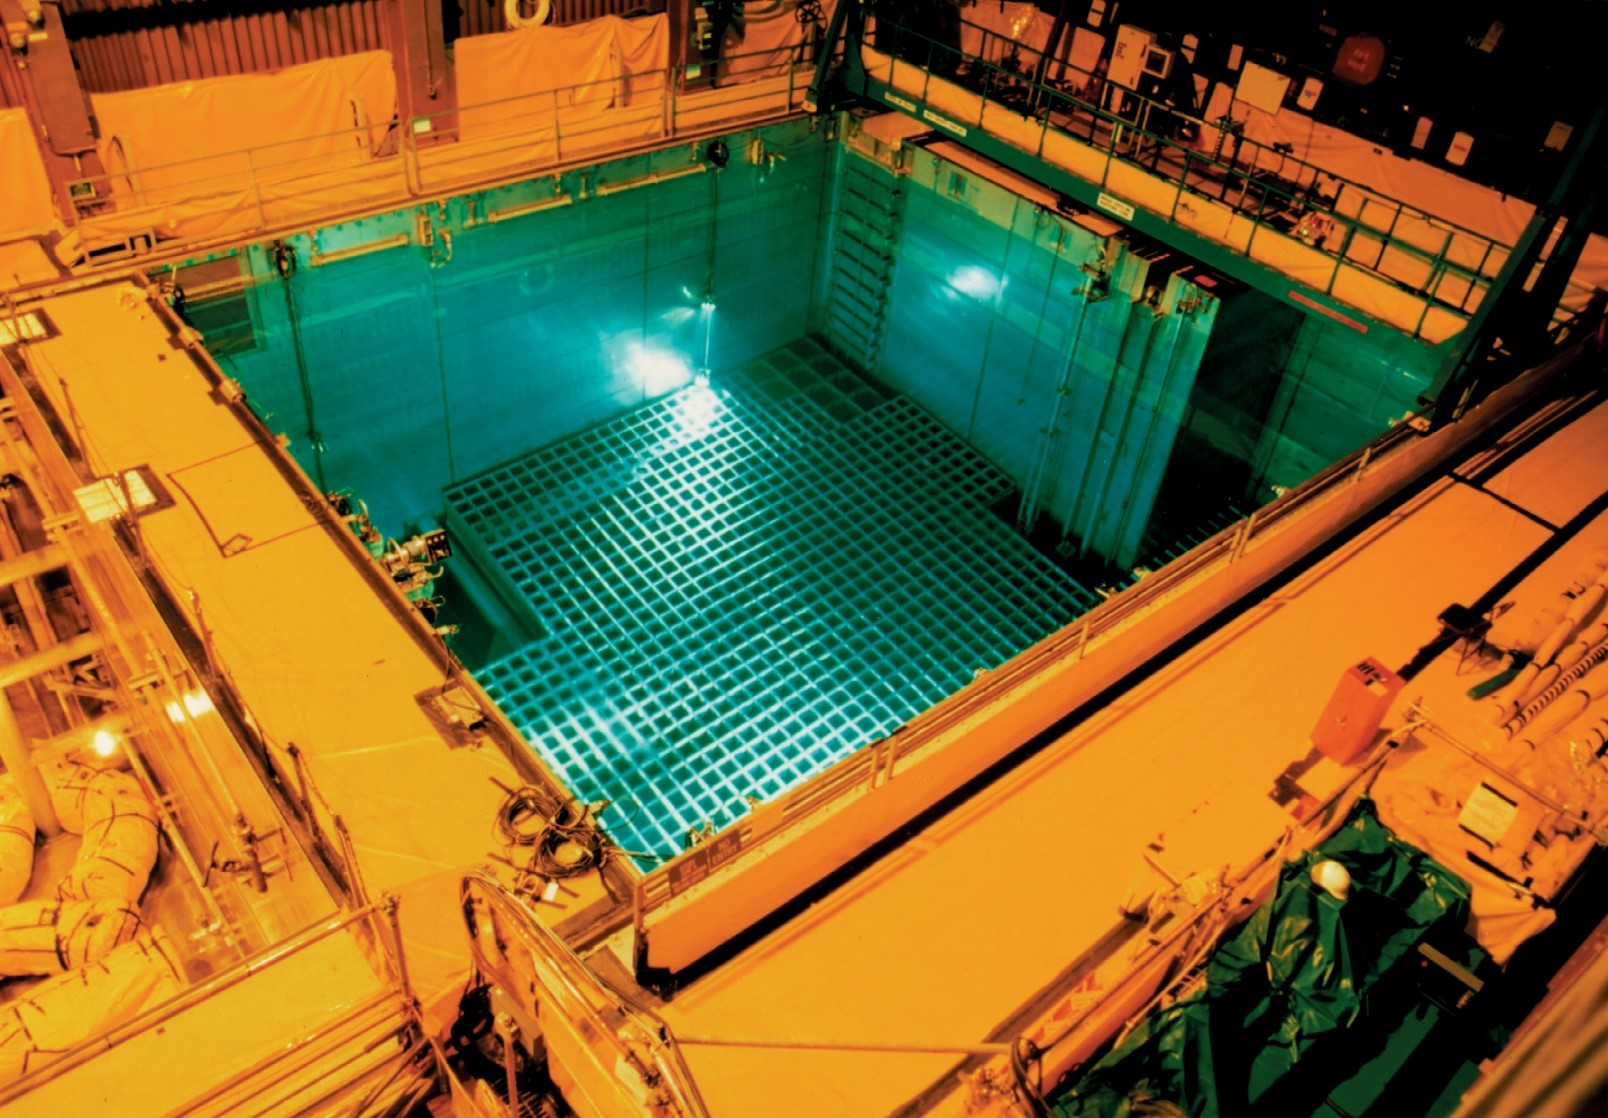 Just Solutions article by Arjun Makhijani featured image of a fuel pool at a nuclear power plant